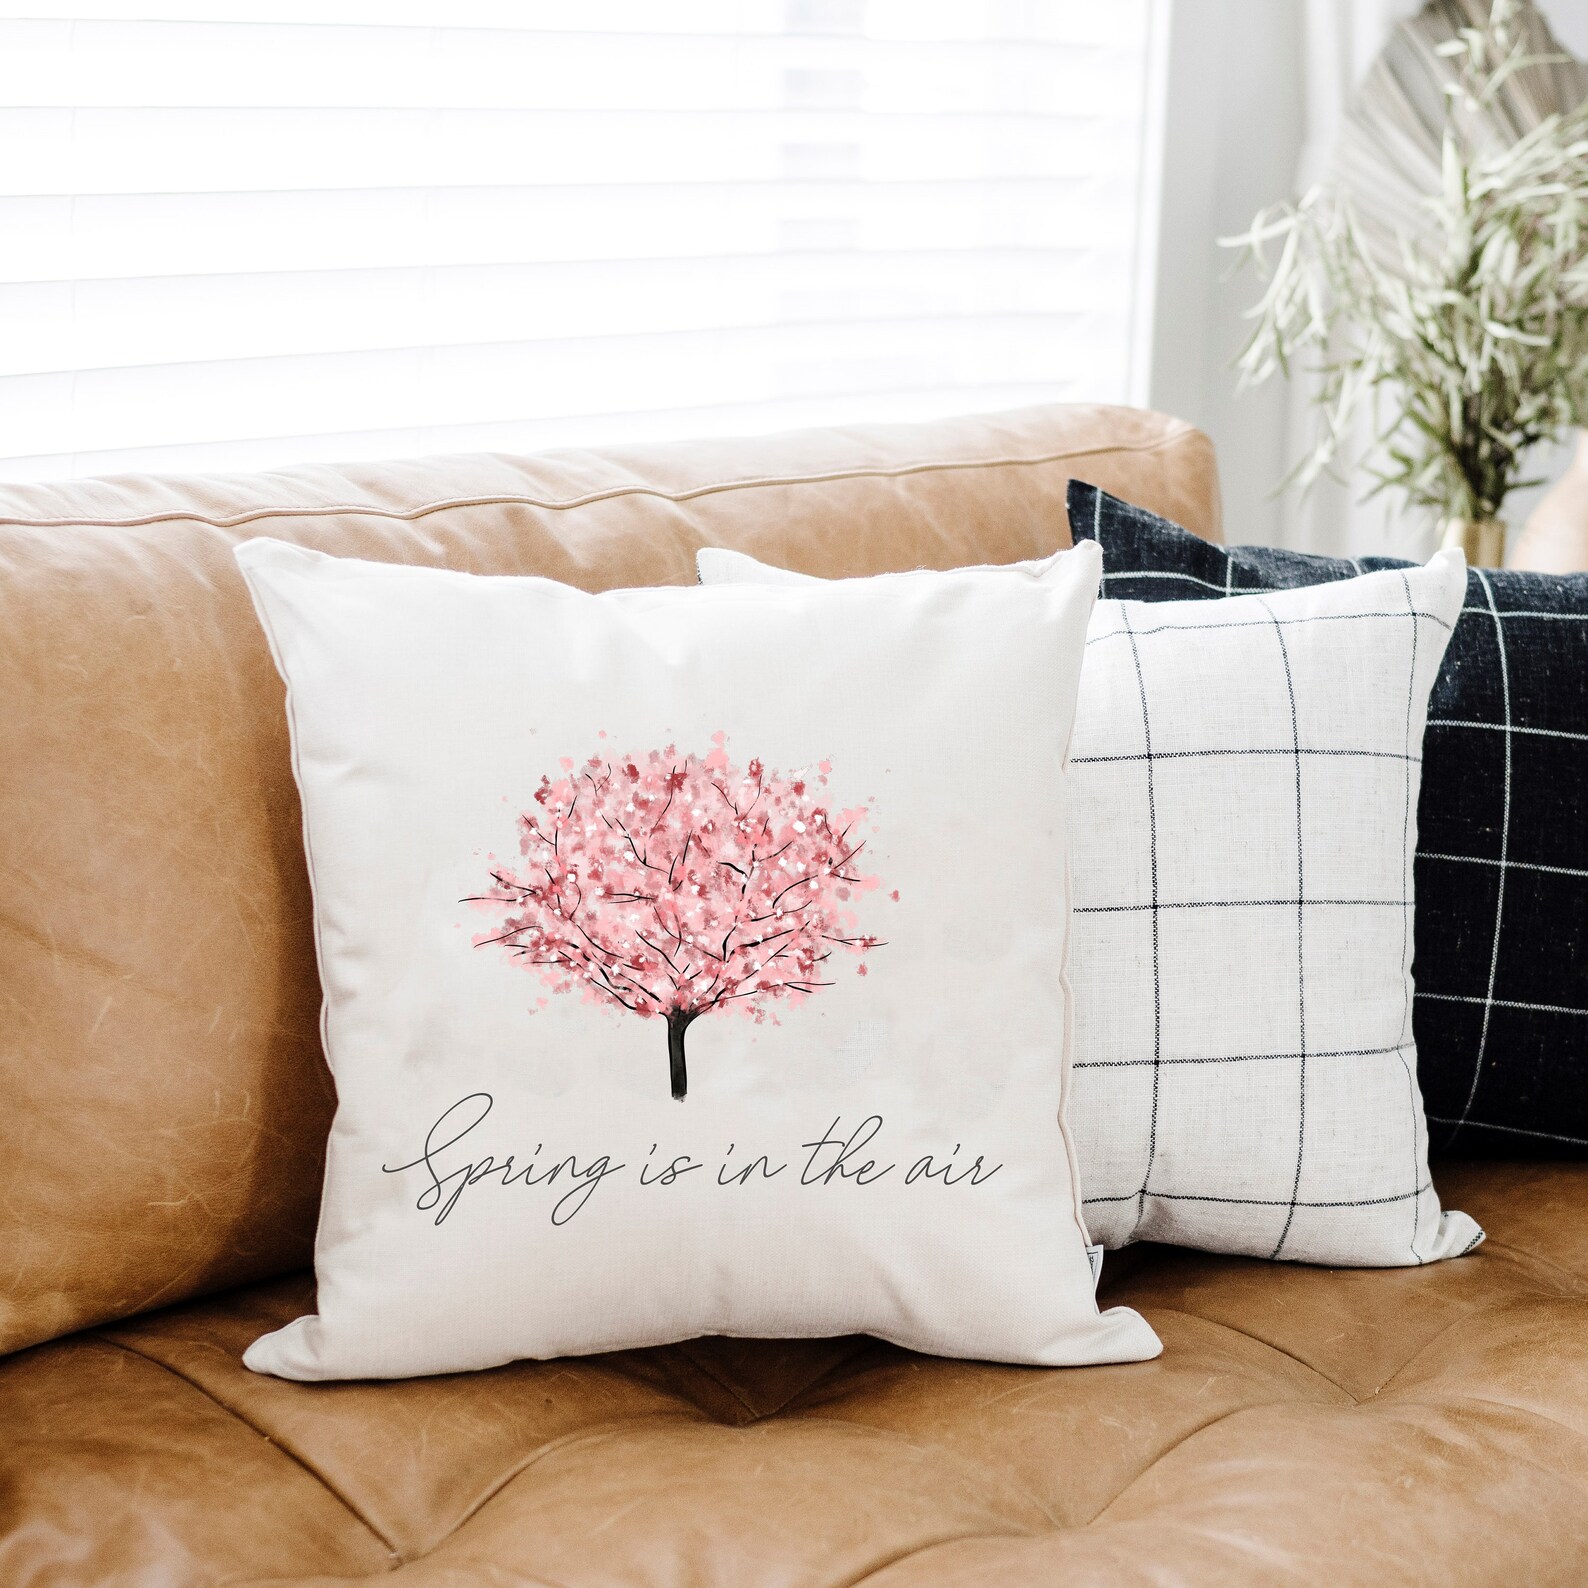 18 Gorgeous Floral Spring Pillow Designs for a Seasonal Update